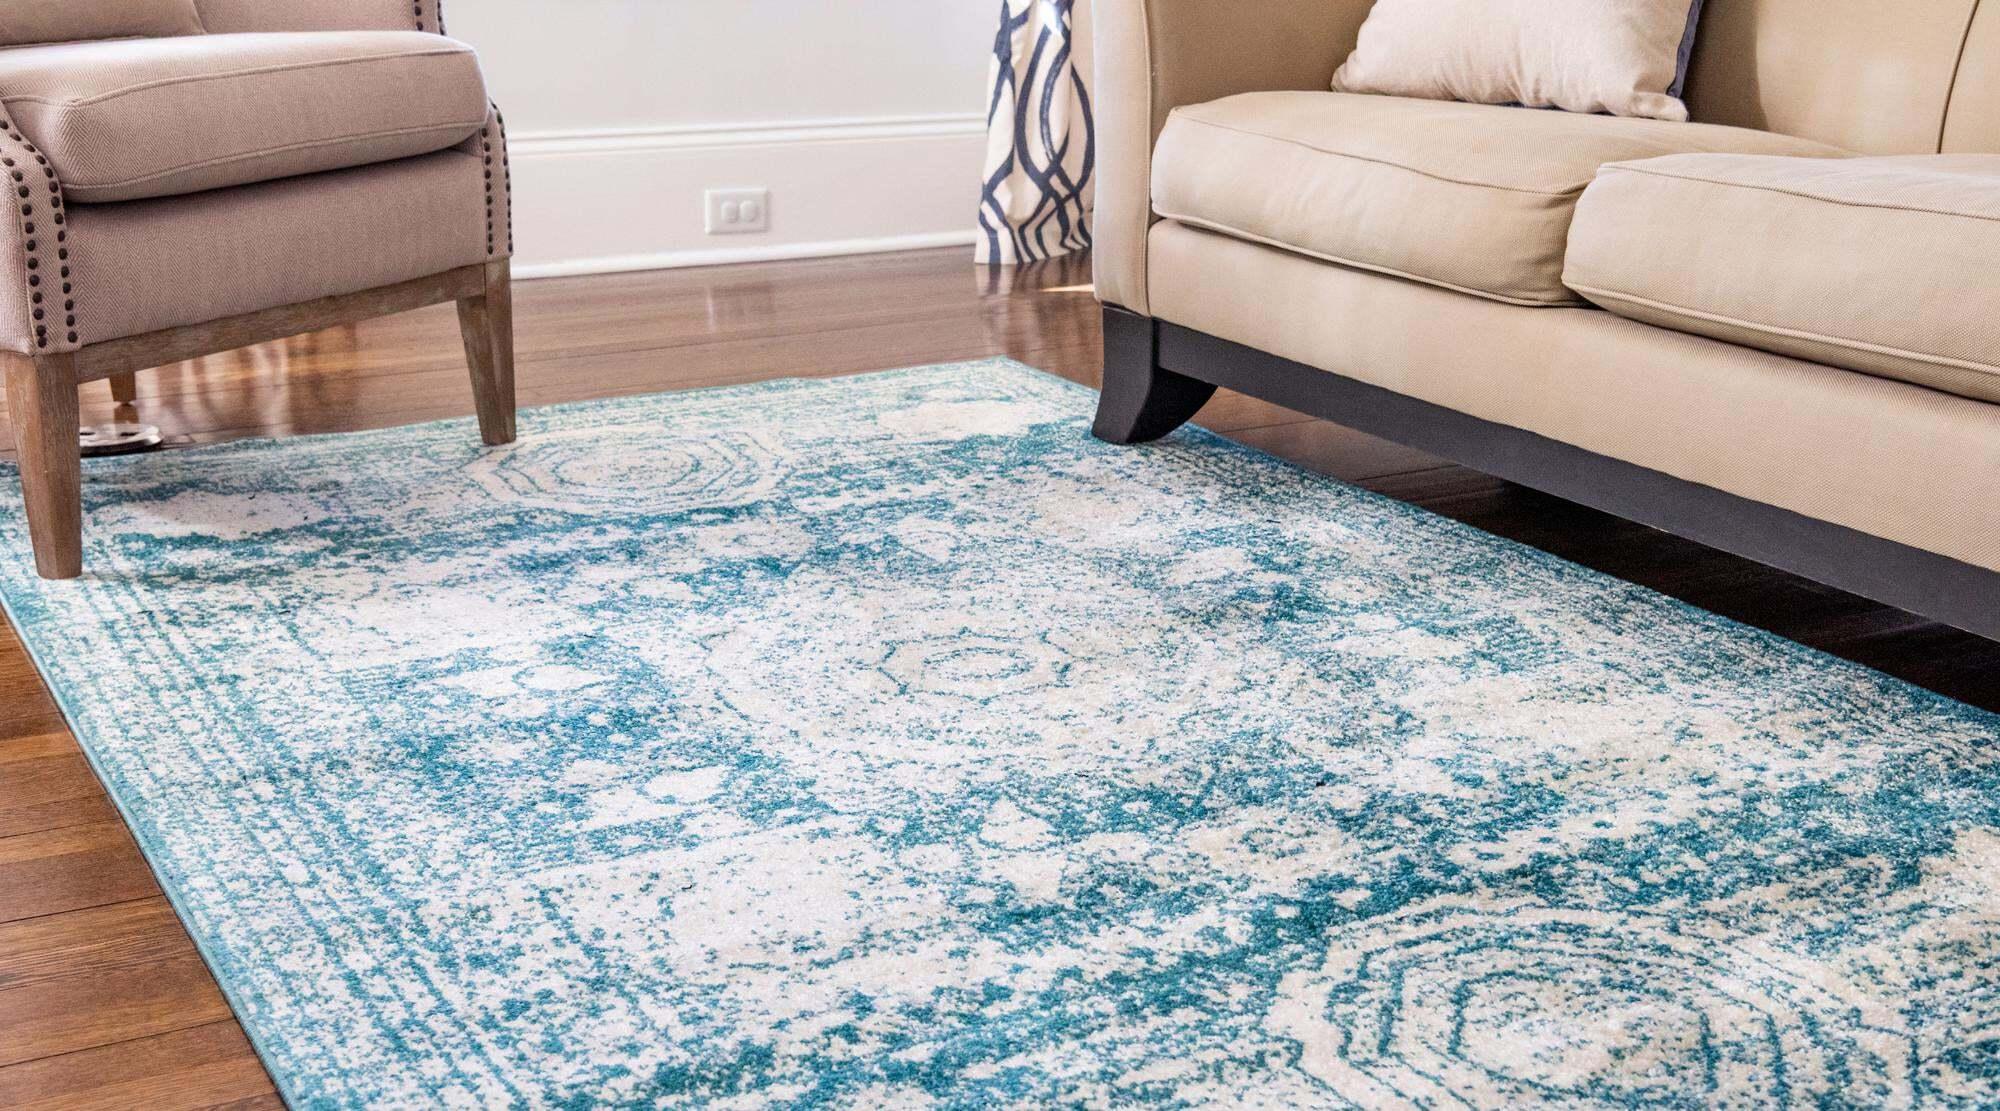 Unique Loom Indoor Rugs - Bromley Border Rectangular 9x12 Rug Turquoise & Ivory